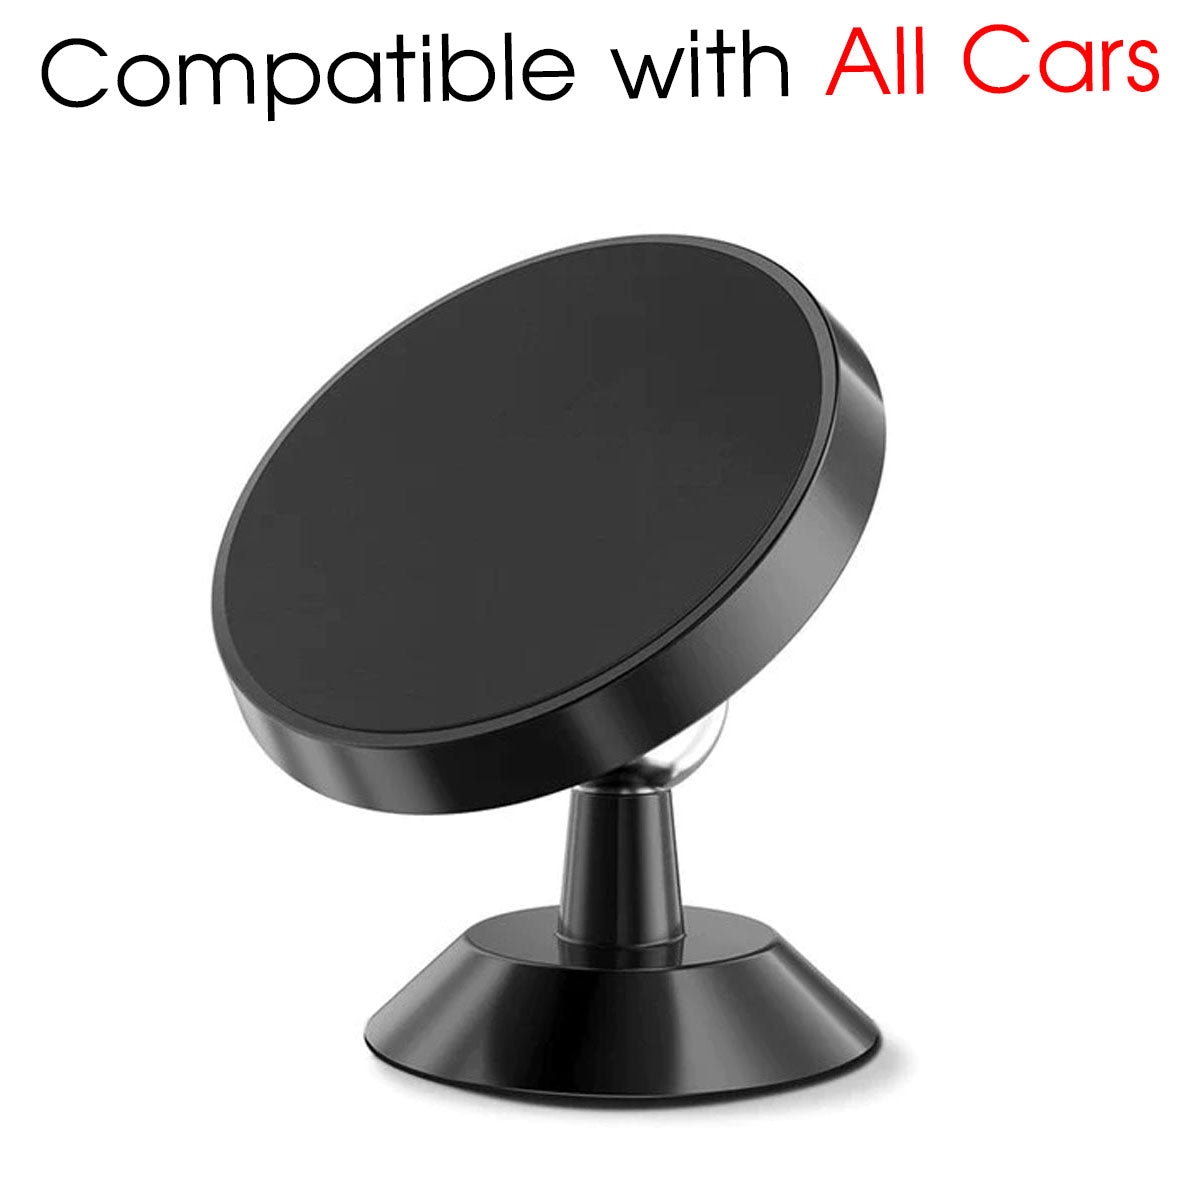 [2 Pack ] Magnetic Phone Mount, Custom For Your Cars, [ Super Strong Magnet ] [ with 4 Metal Plate ] car Magnetic Phone Holder, [ 360° Rotation ] Universal Dashboard car Mount Fits All Cell Phones, Car Accessories LM13982